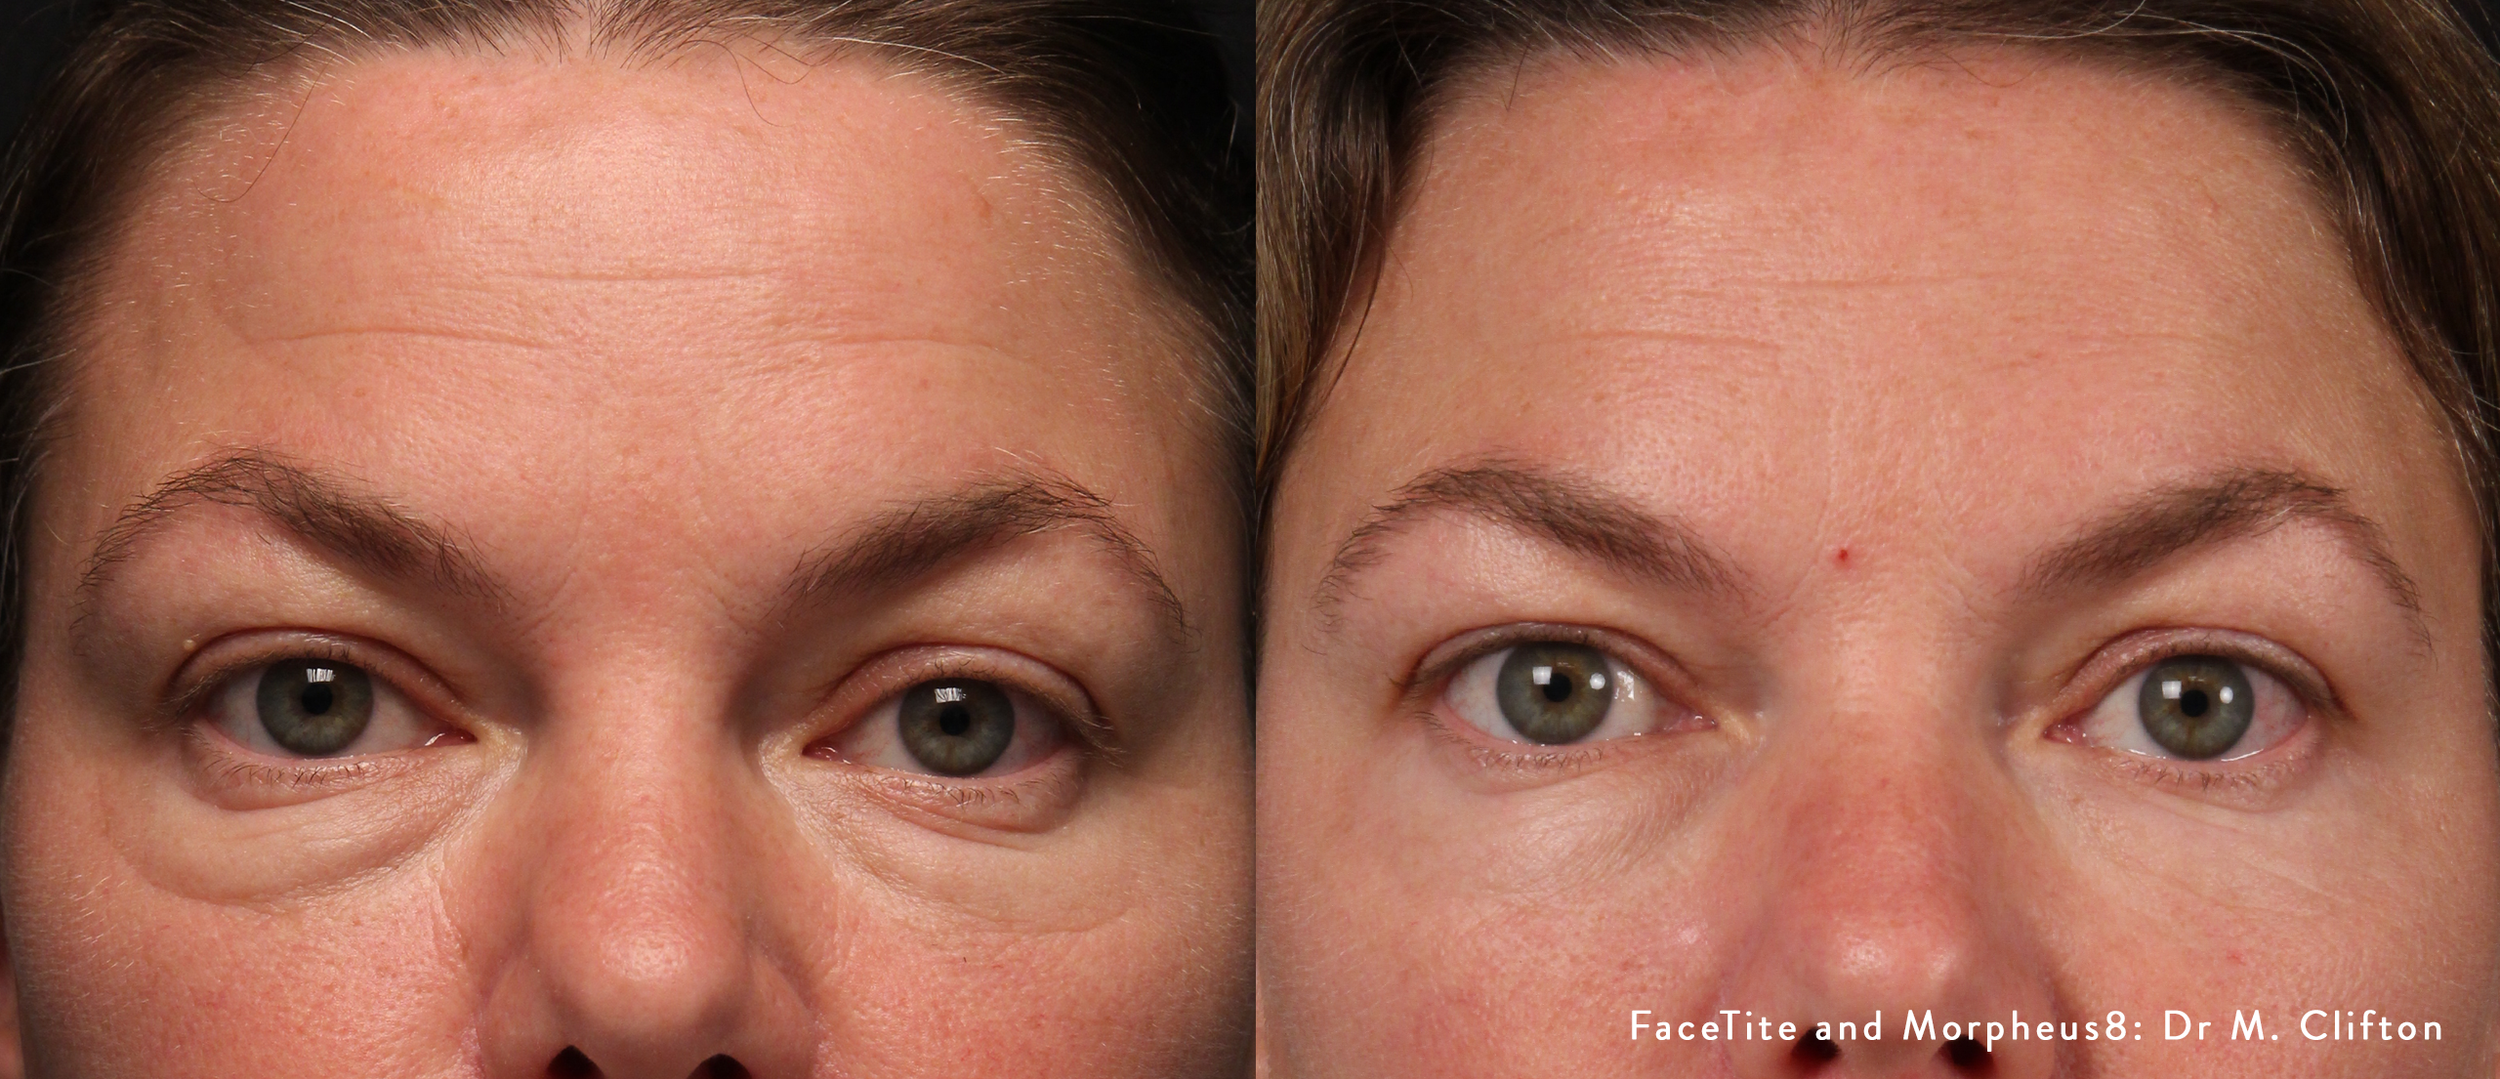 facetite-and-morpheus8-before-after-dr-m-clifton-preview-1.png